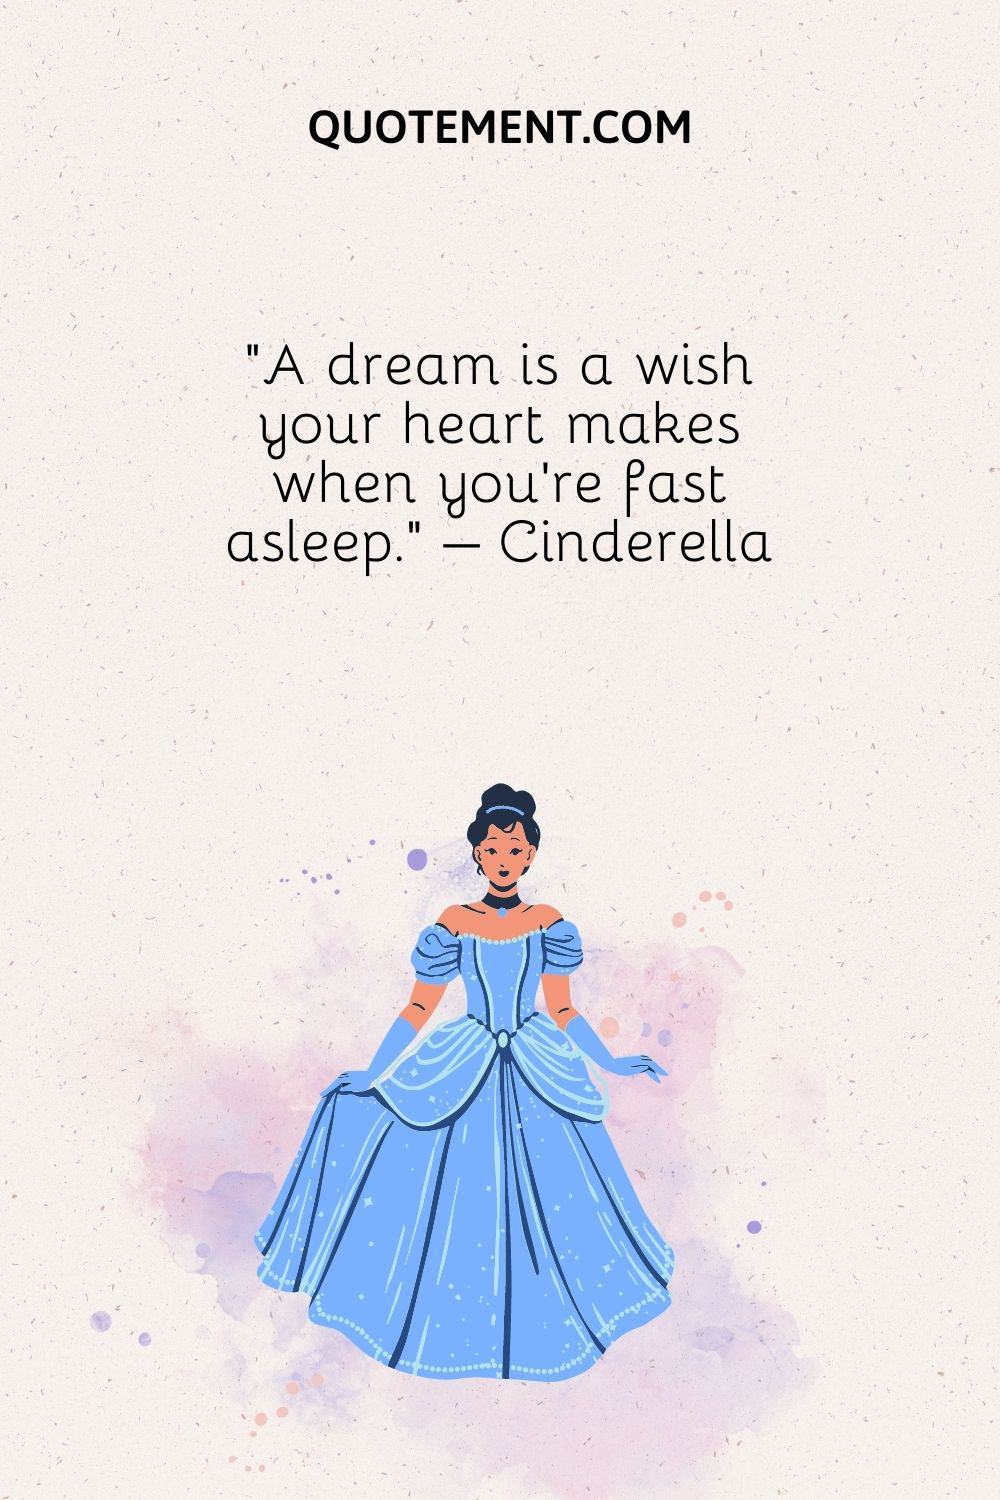 A dream is a wish your heart makes when you’re fast asleep.